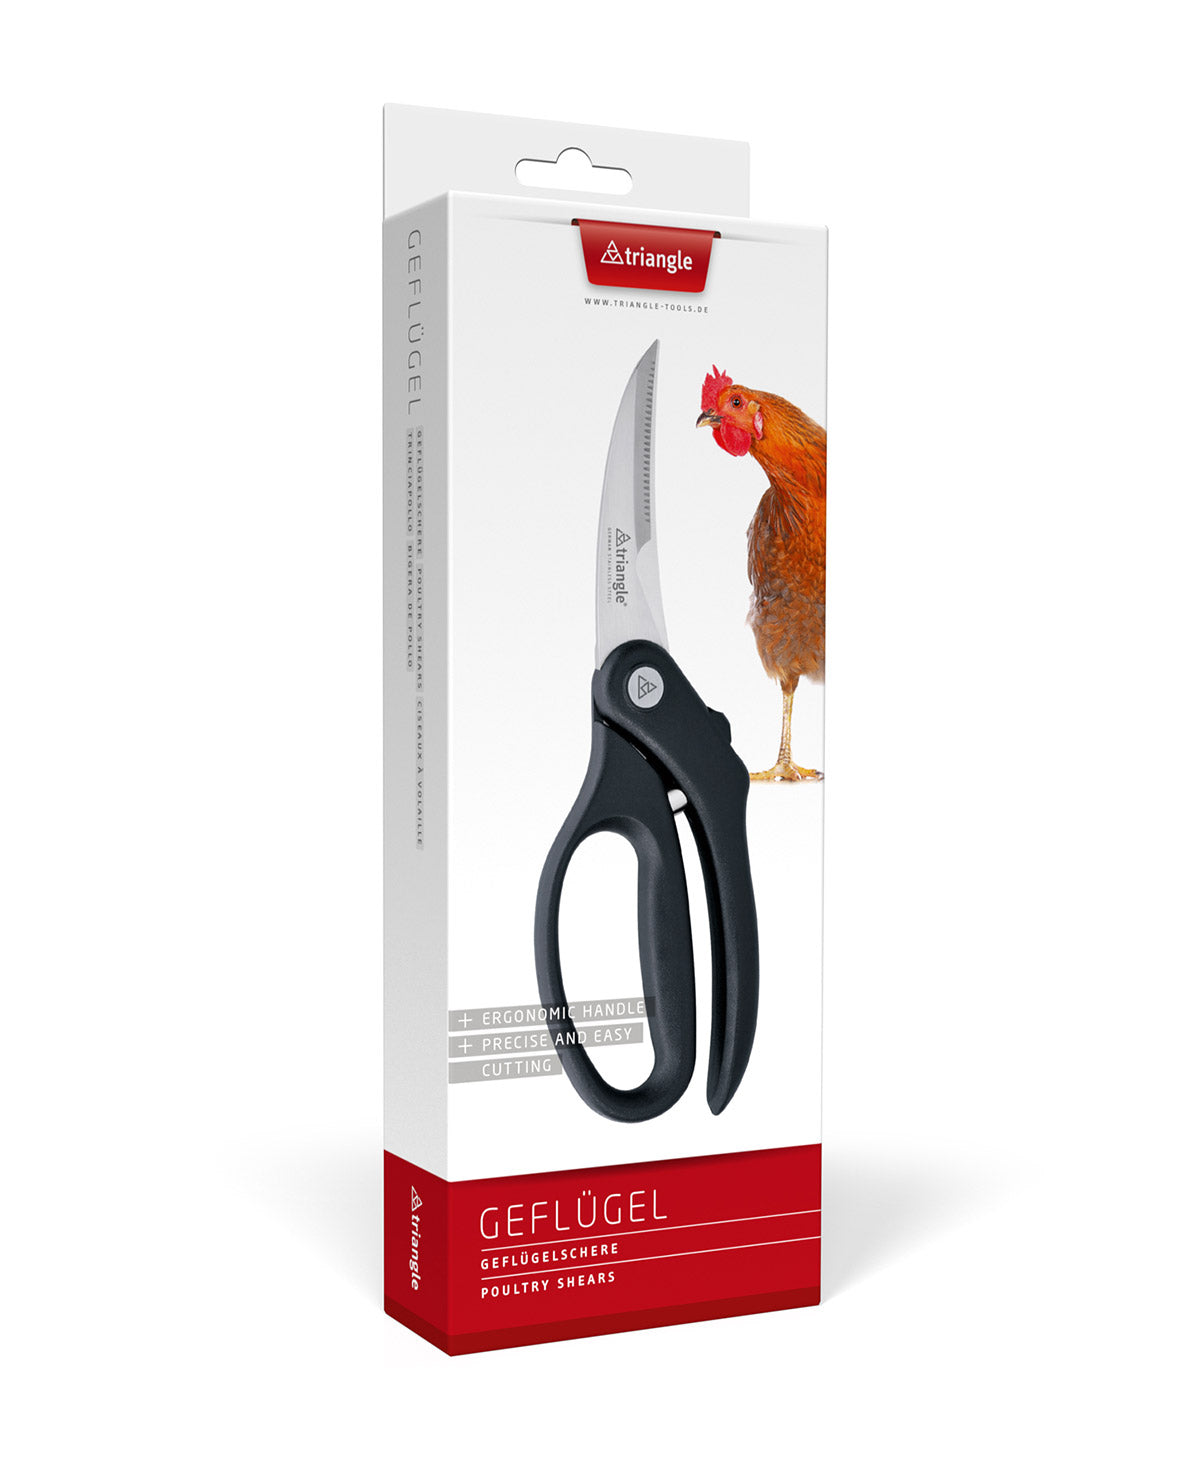 Poultry shears -5047710